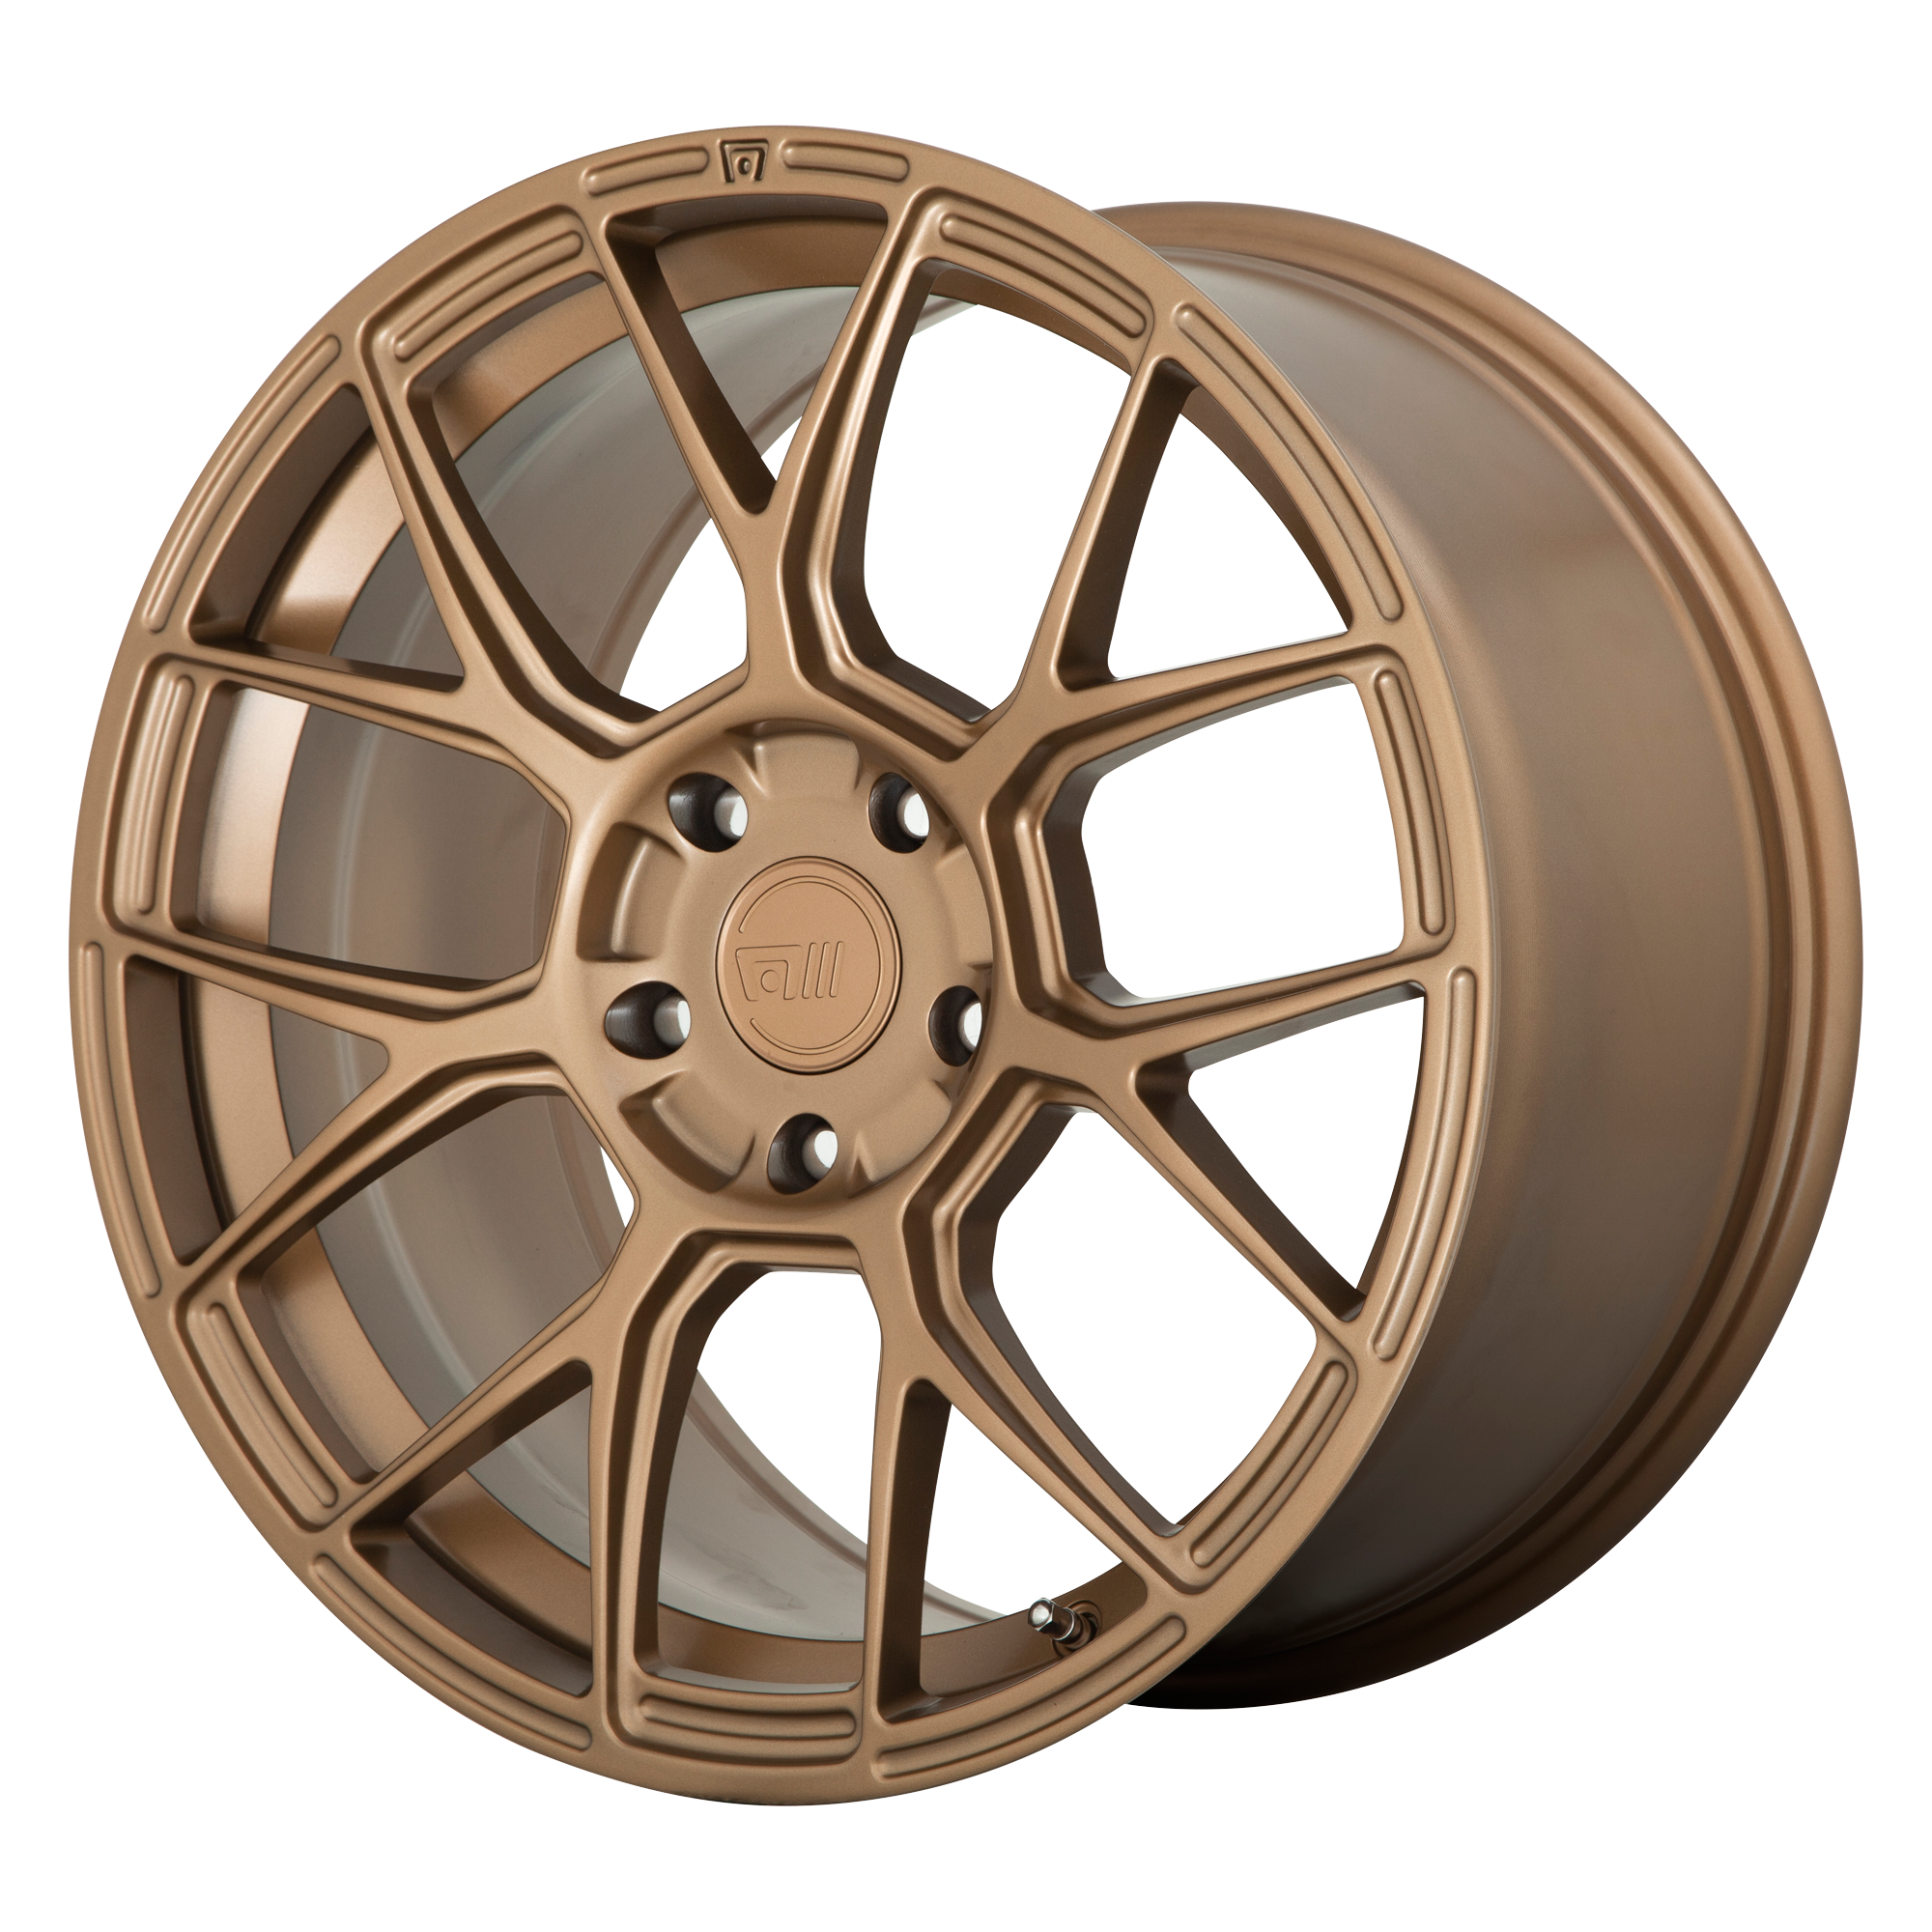 CM7 17x8 5x108.00 MATTE BRONZE (38 mm) - Tires and Engine Performance